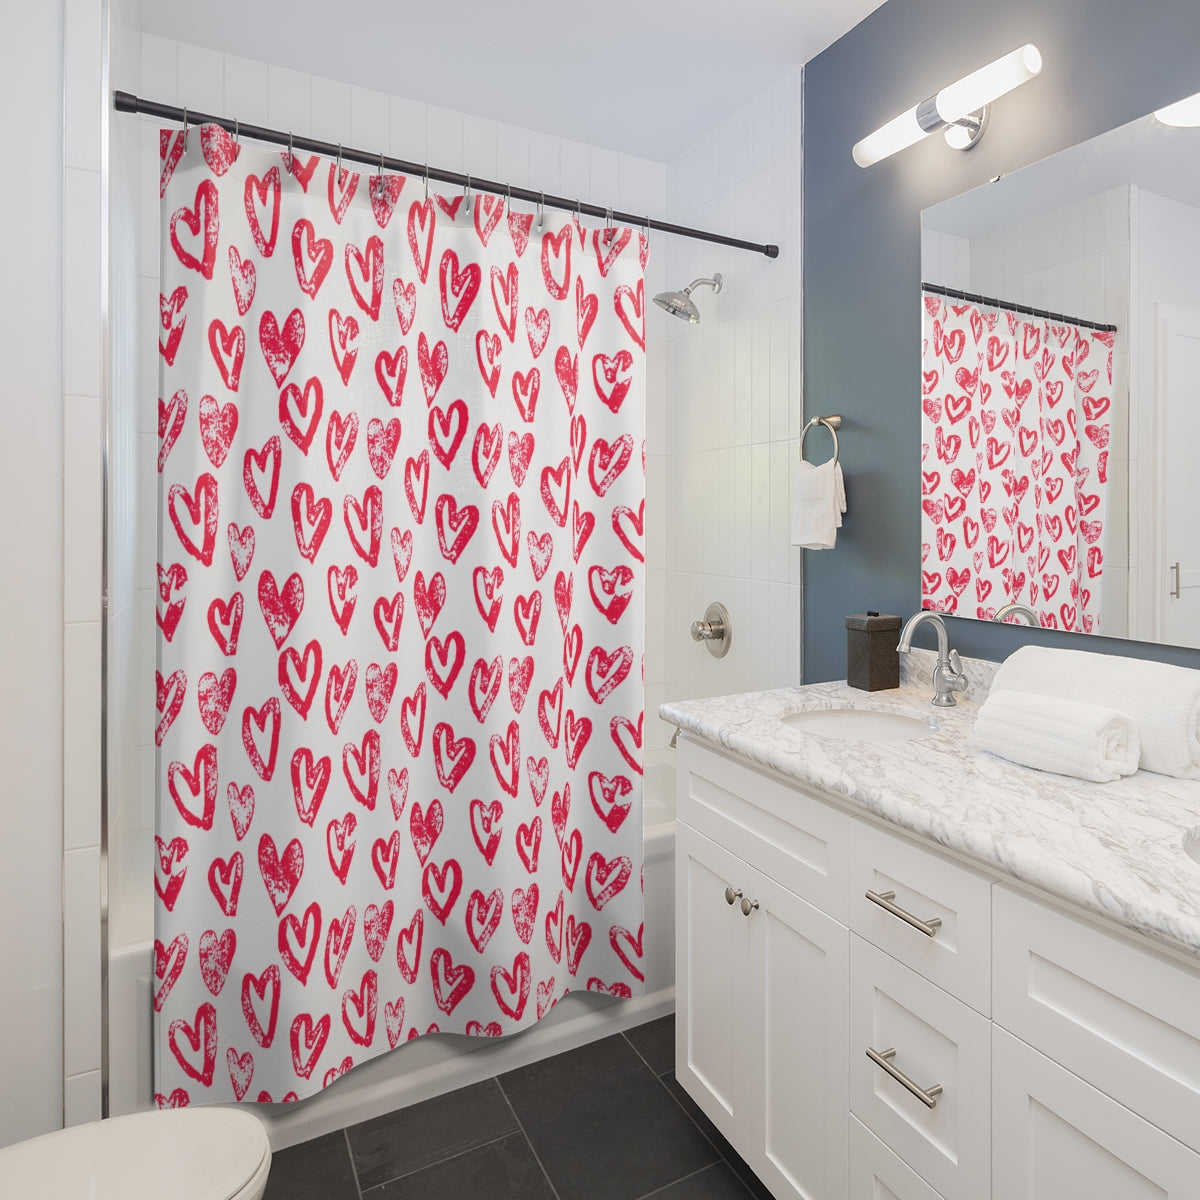 Lovely Hearts Shower Curtains